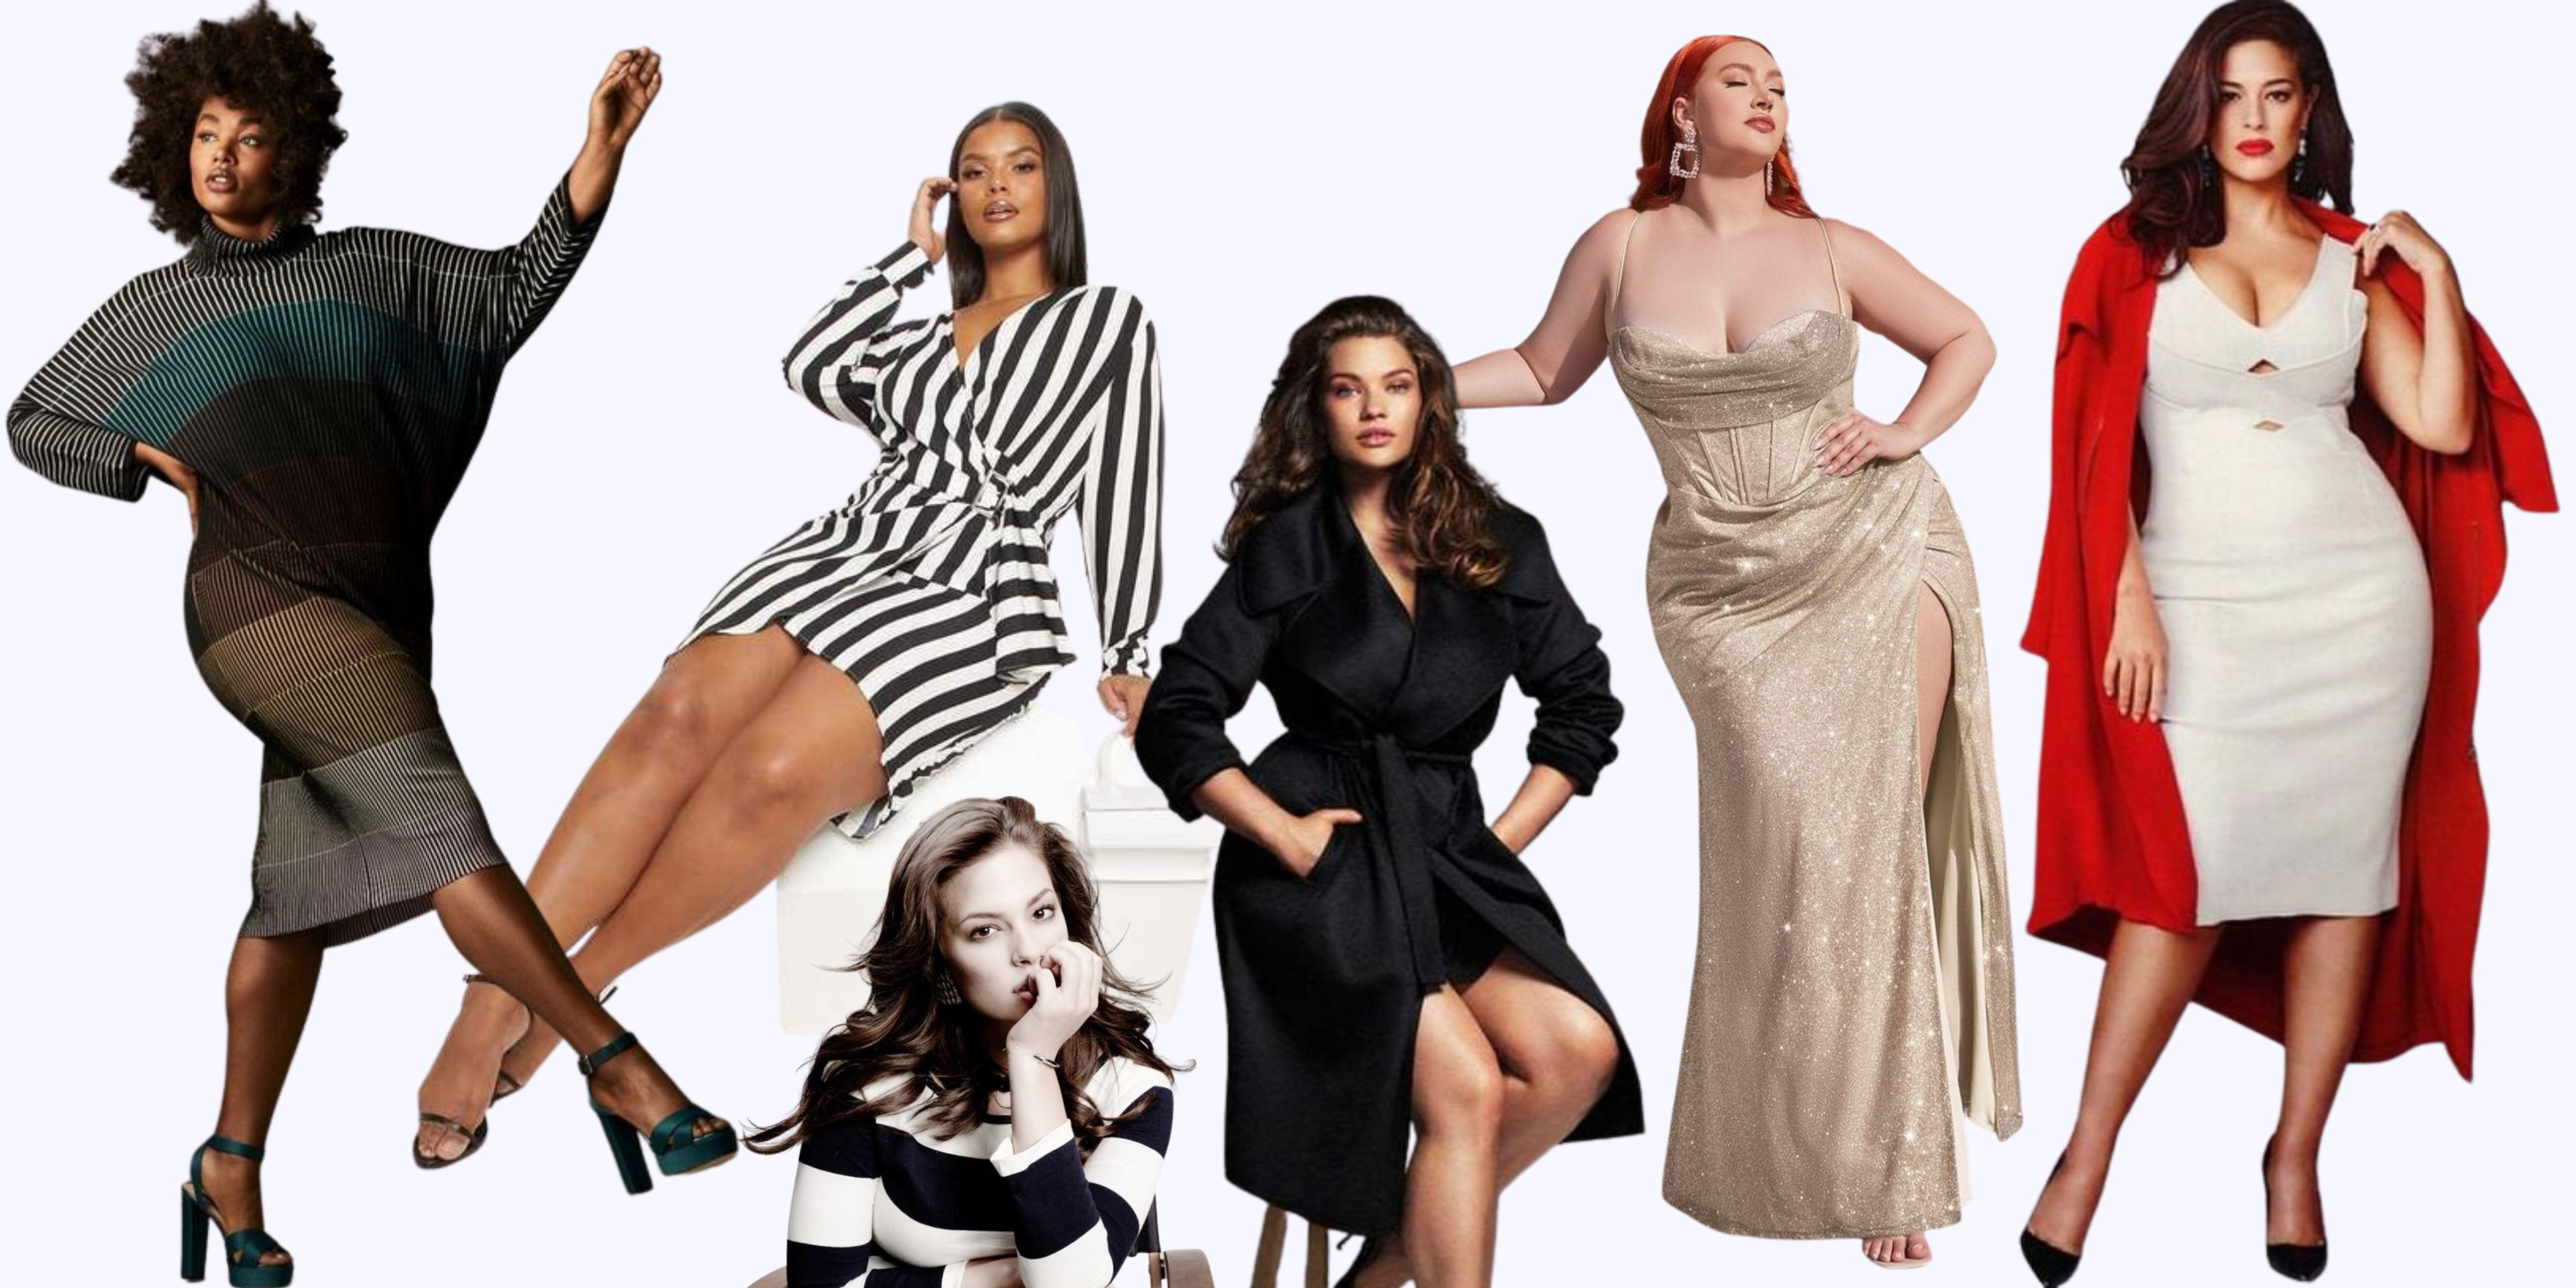 plus size, modern plus size, plus size models, what is plus size, where did plus size come from